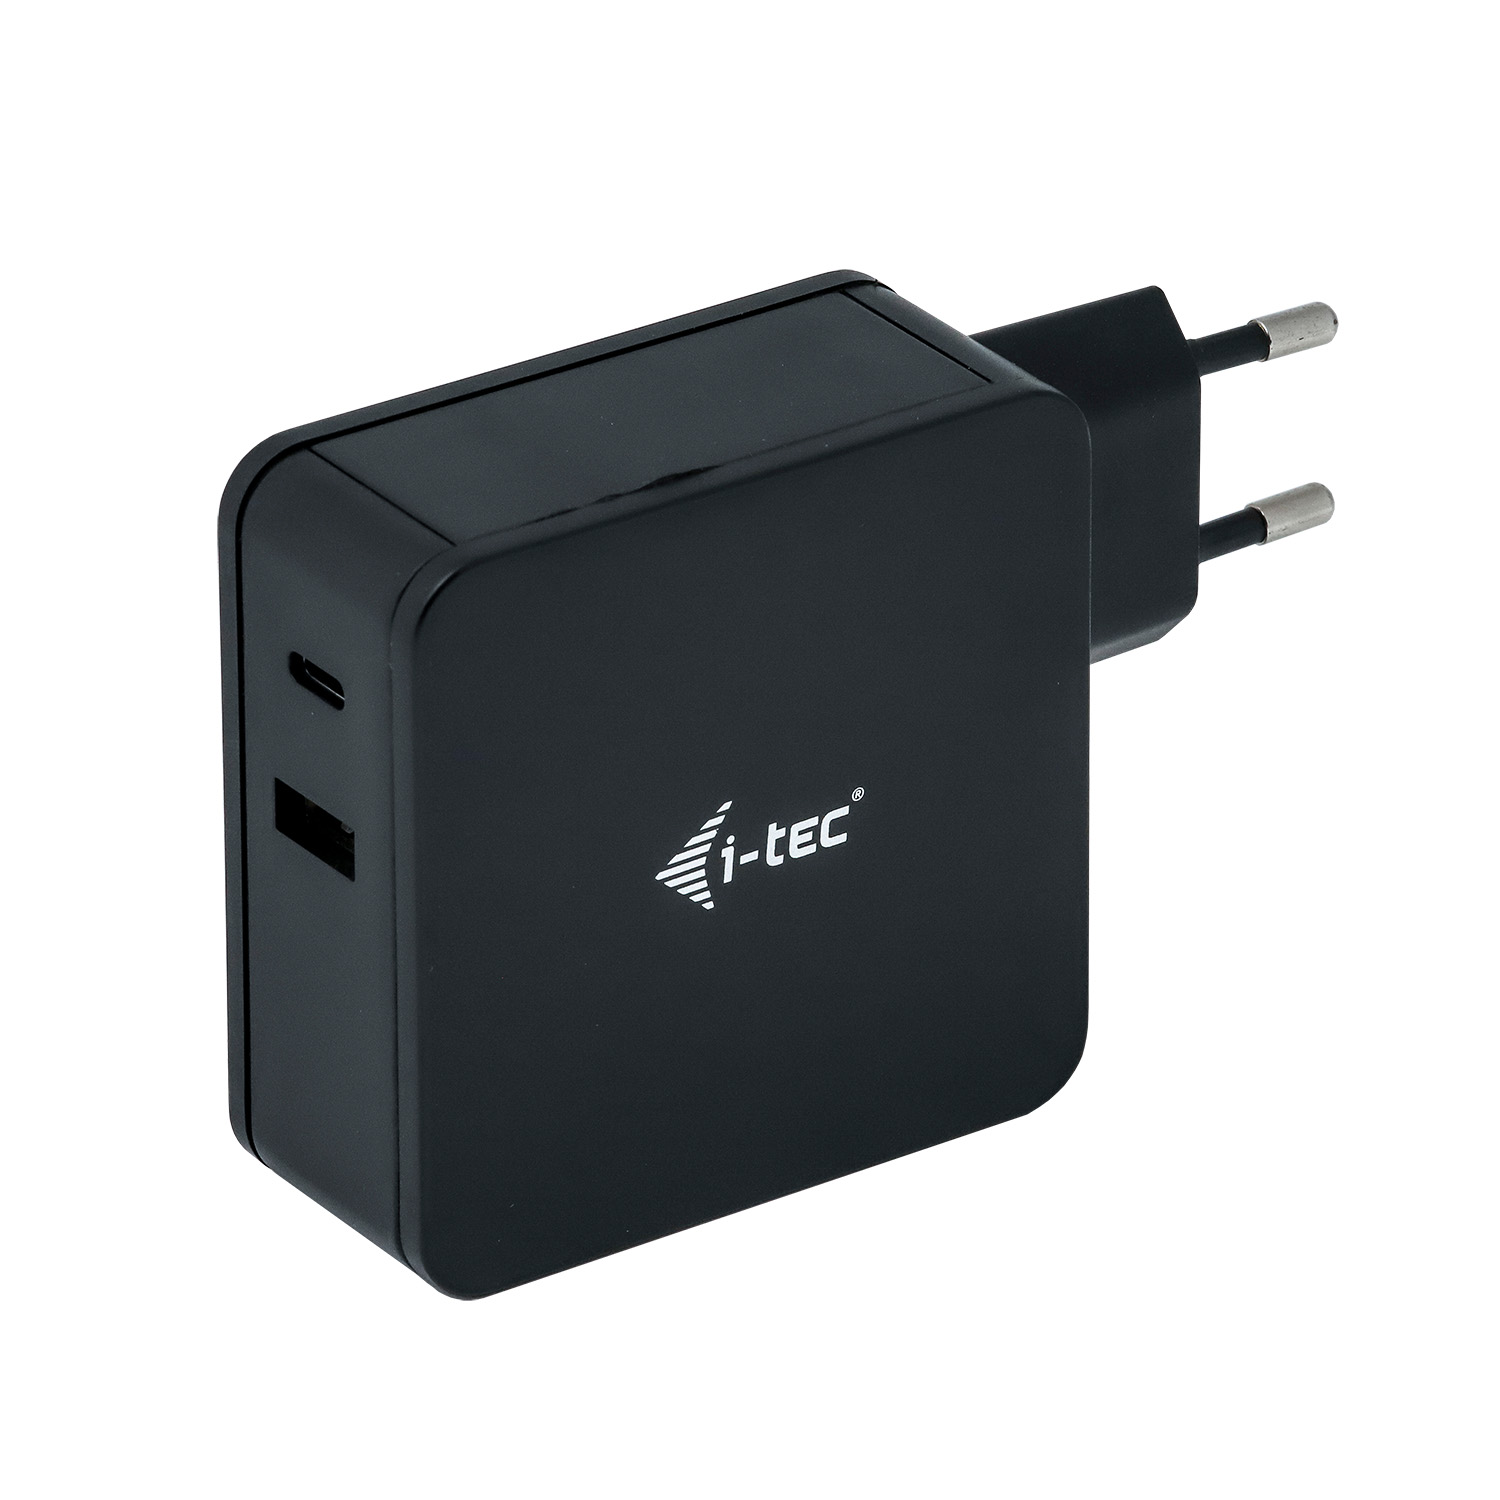 CHARGER-C60WPLUS Schwarz I-TEC Charger,